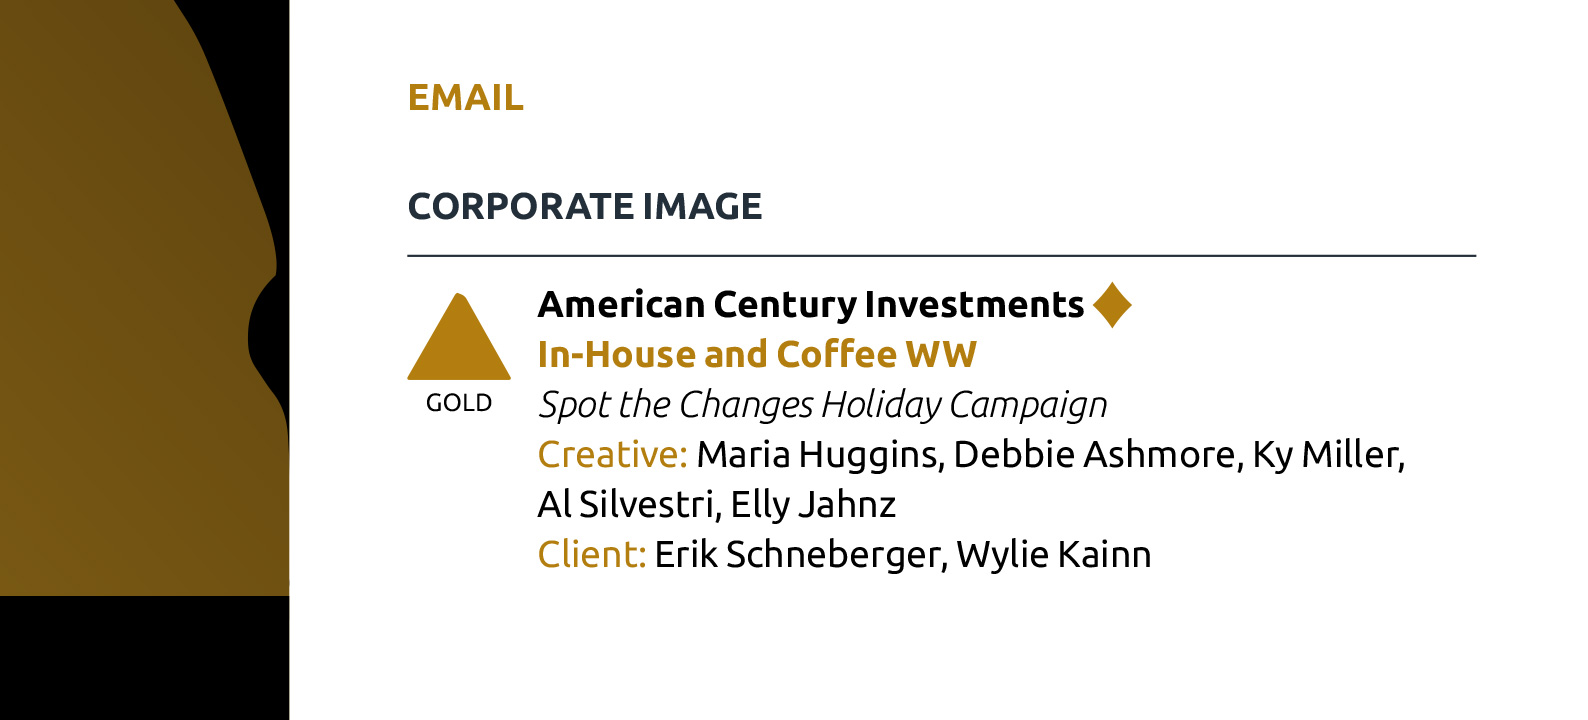 Screengrab of award for American Century Investments